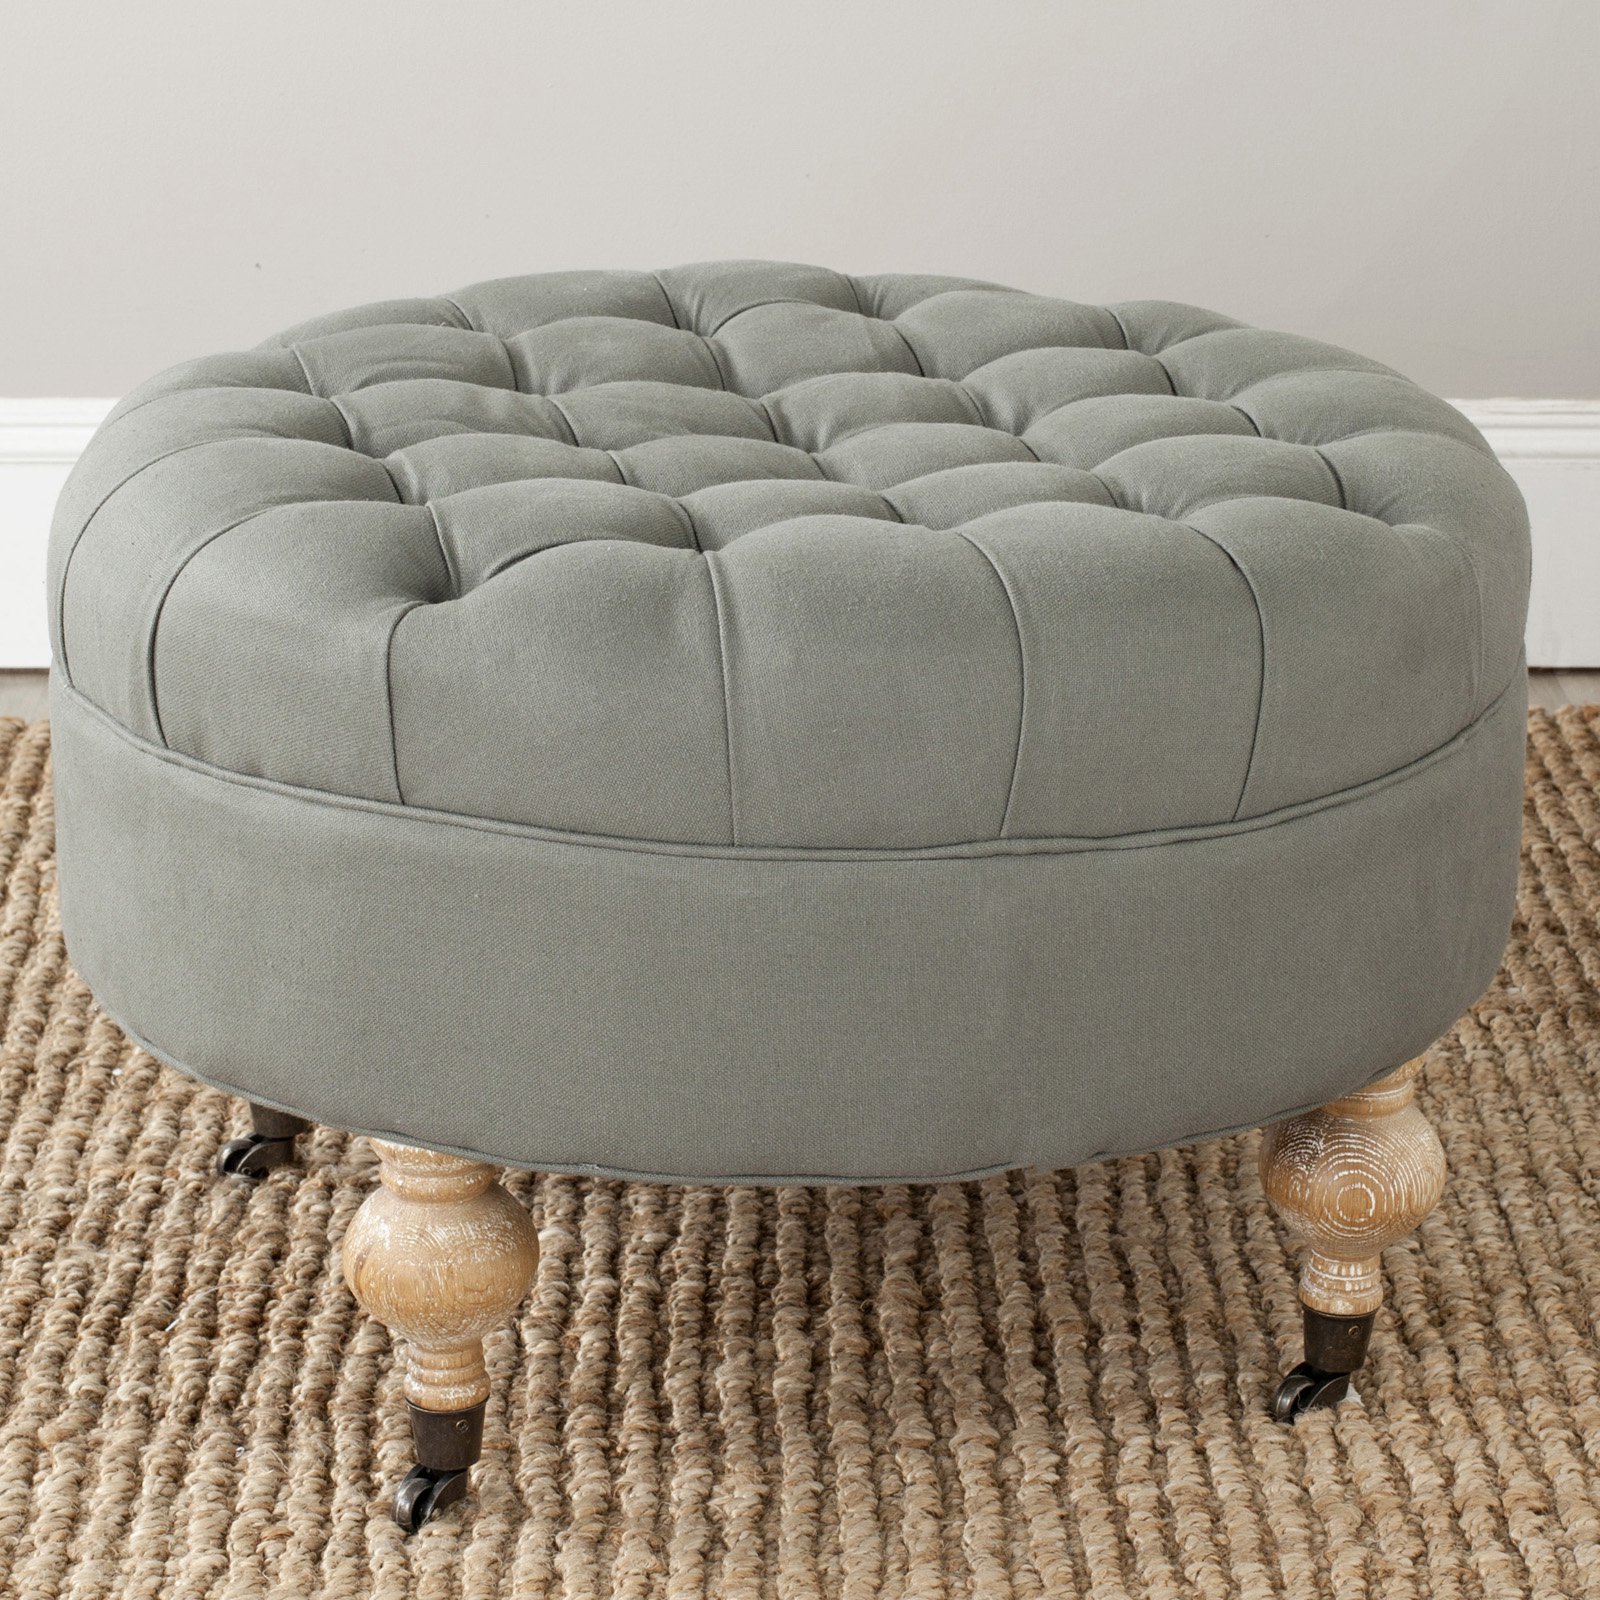 Safavieh Clara Classic Rustic Tufted Round Ottoman with Casters - image 1 of 2